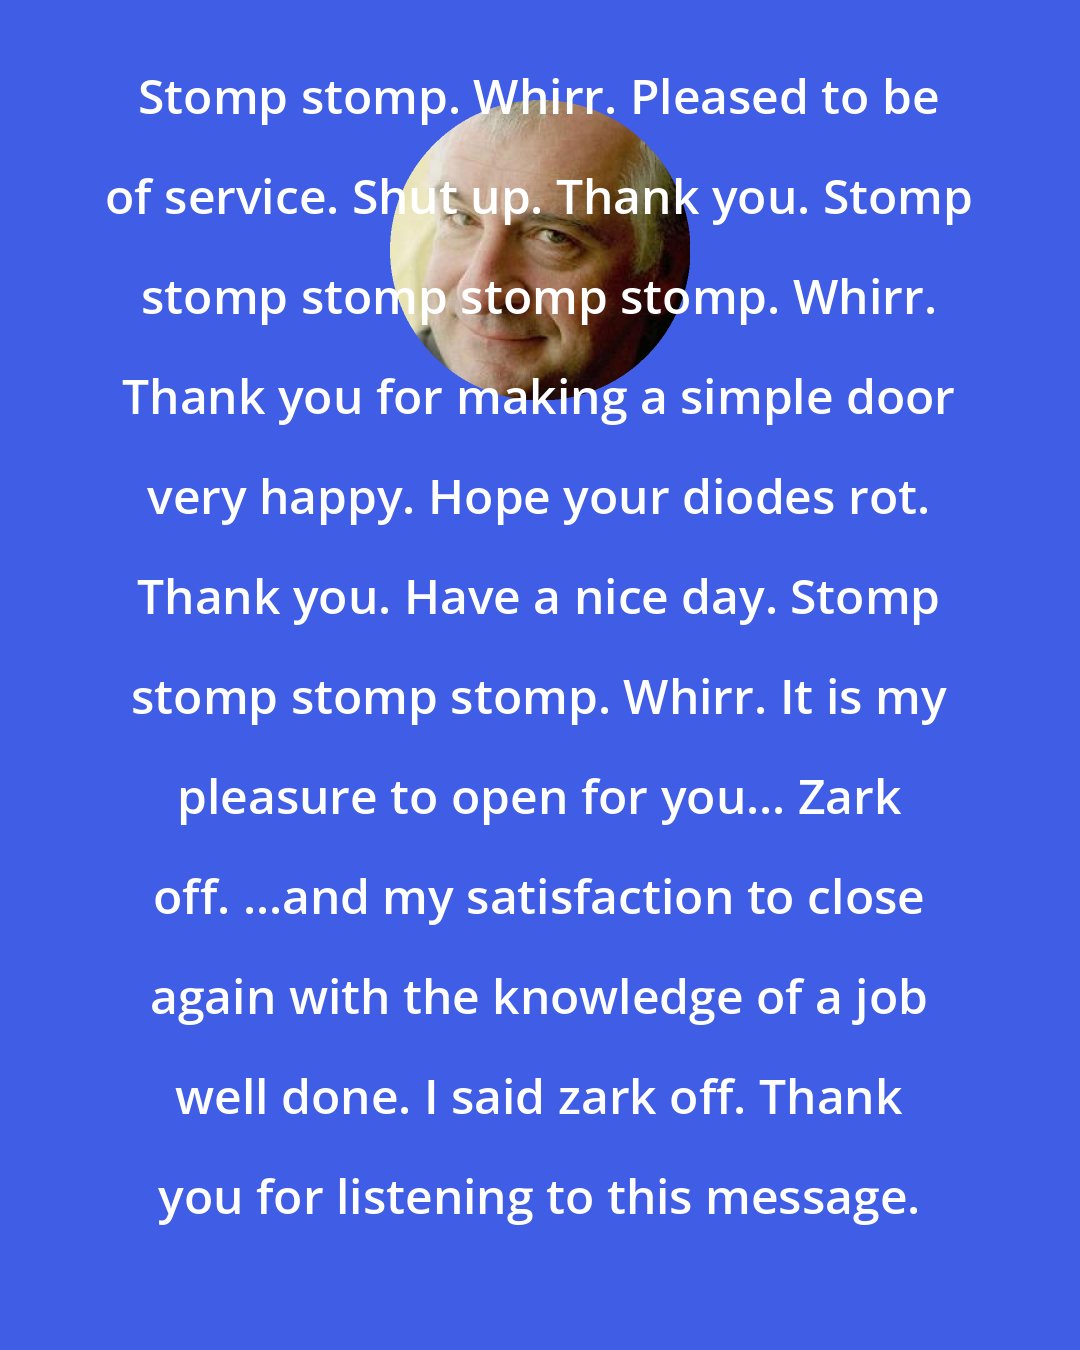 Douglas Adams: Stomp stomp. Whirr. Pleased to be of service. Shut up. Thank you. Stomp stomp stomp stomp stomp. Whirr. Thank you for making a simple door very happy. Hope your diodes rot. Thank you. Have a nice day. Stomp stomp stomp stomp. Whirr. It is my pleasure to open for you... Zark off. ...and my satisfaction to close again with the knowledge of a job well done. I said zark off. Thank you for listening to this message.